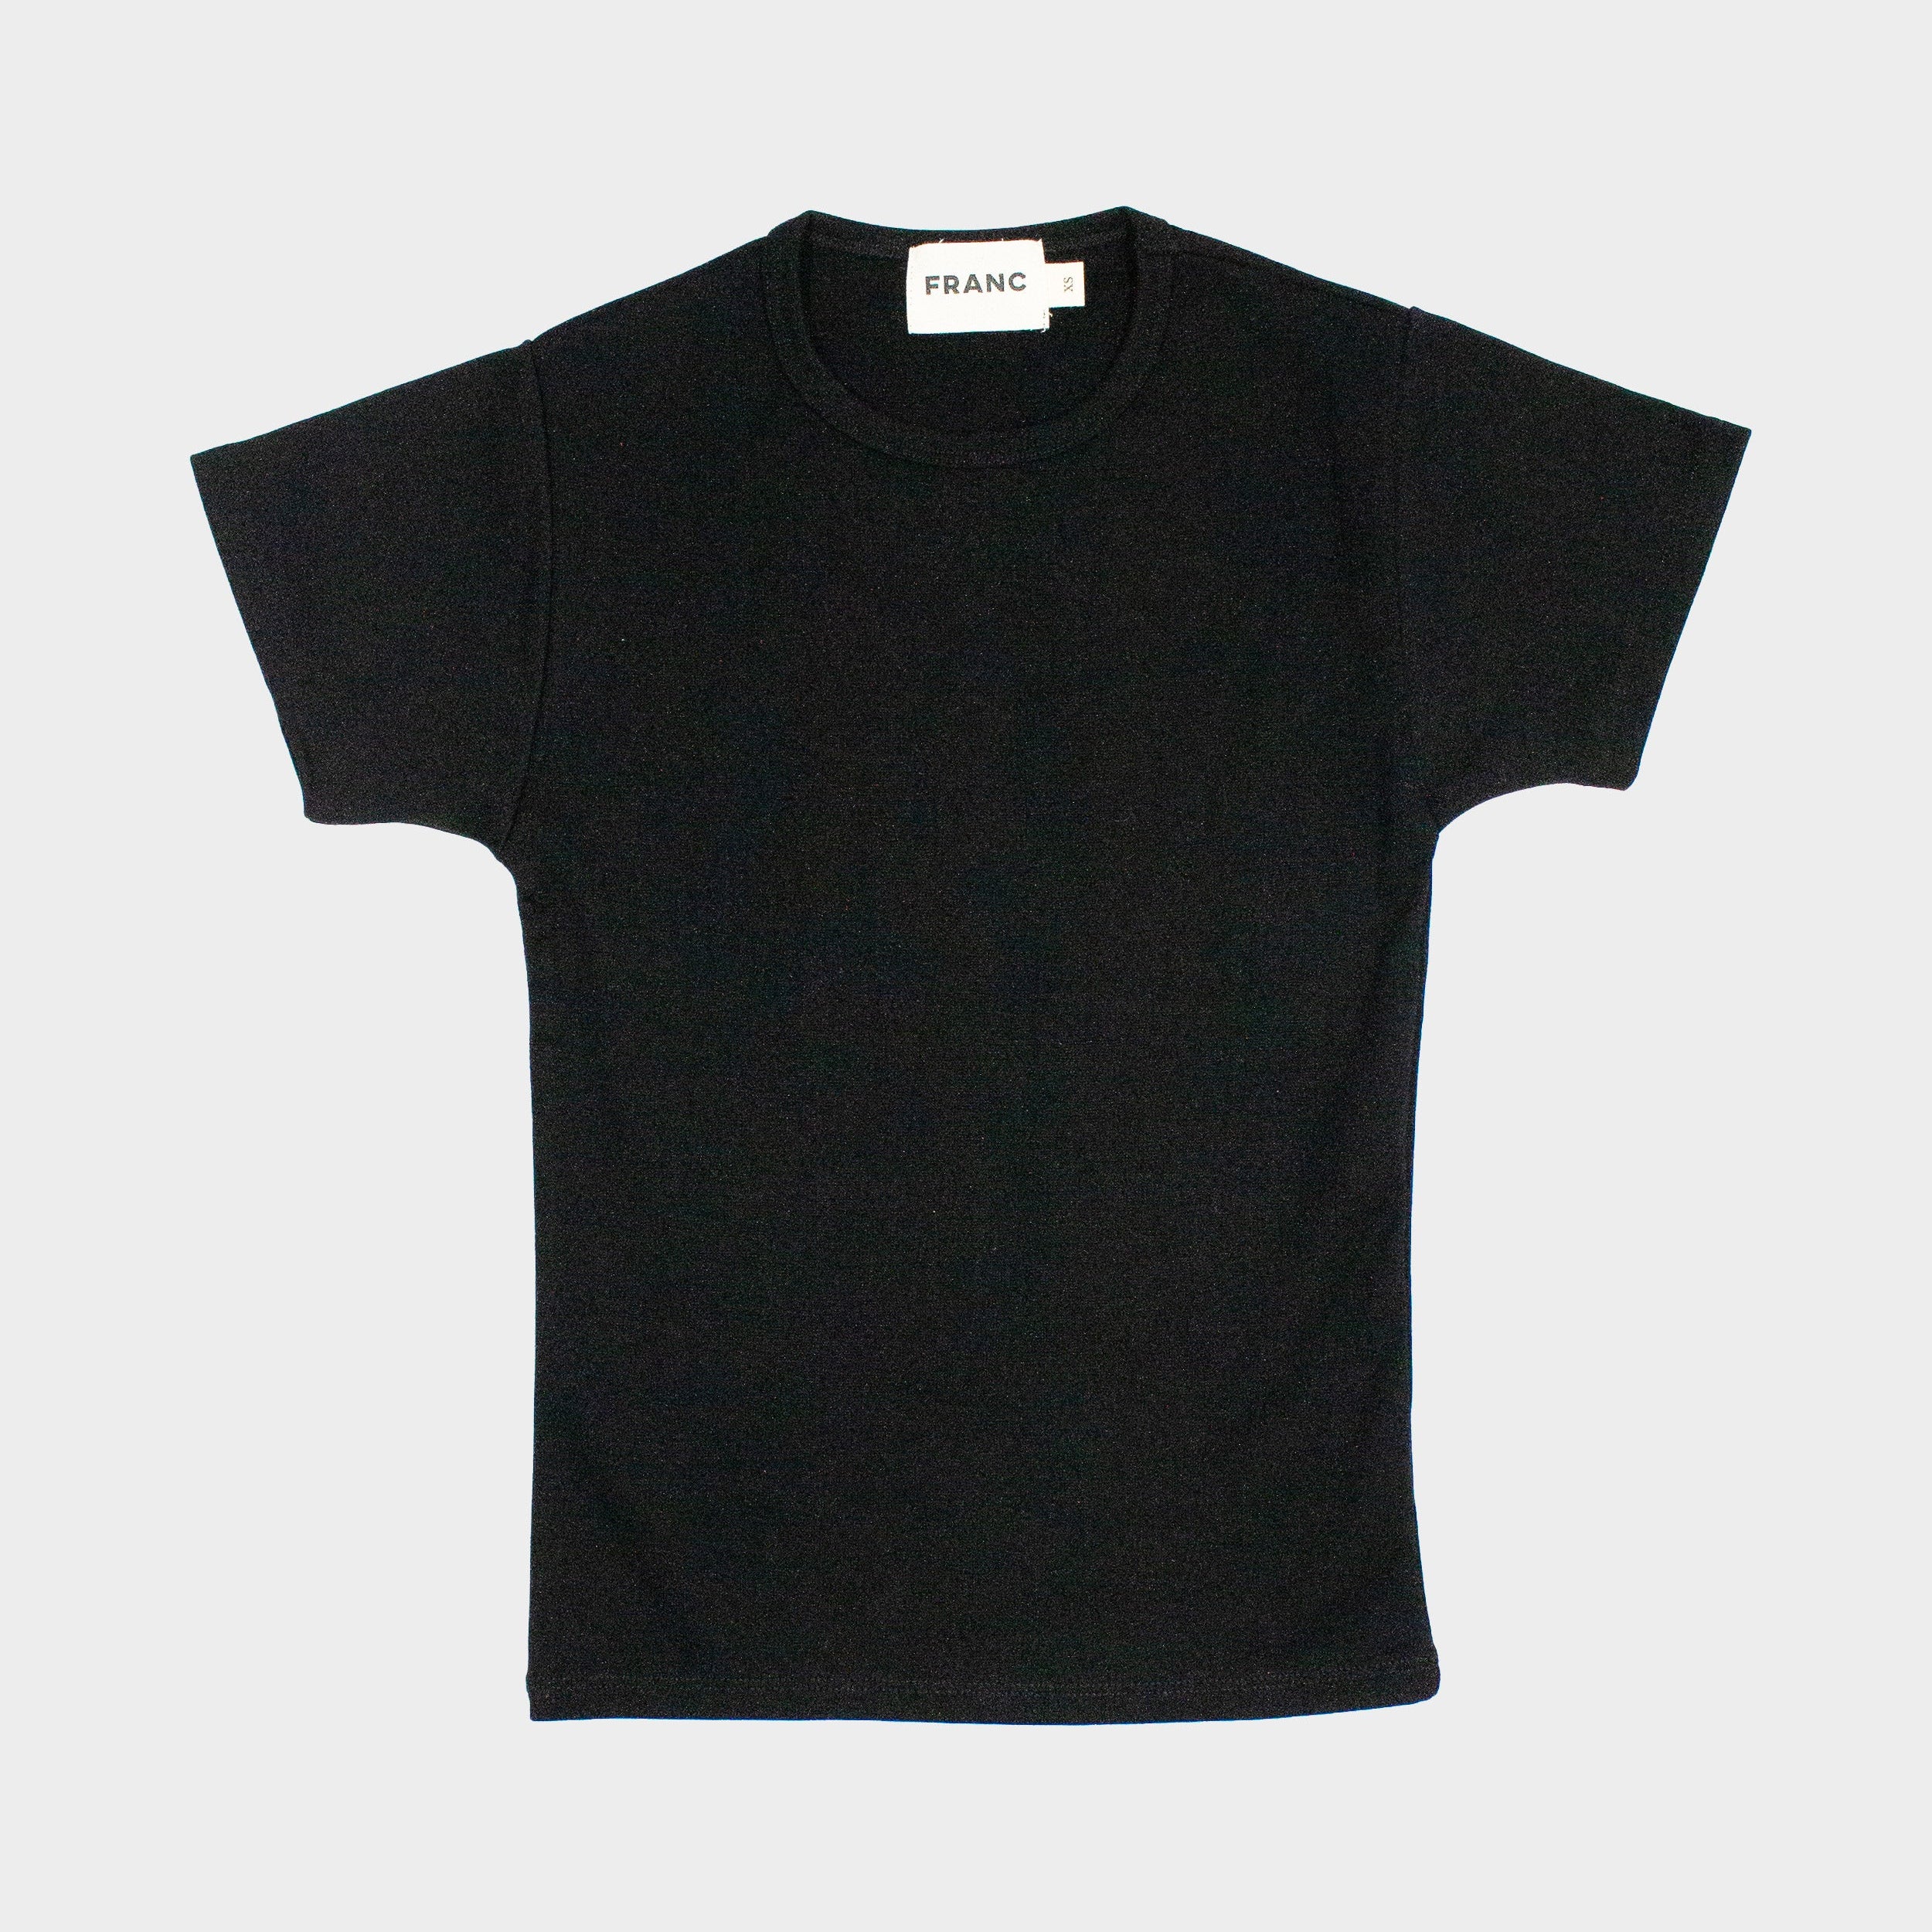 The Babe Tee in Black | FRANC Sustainable Clothing